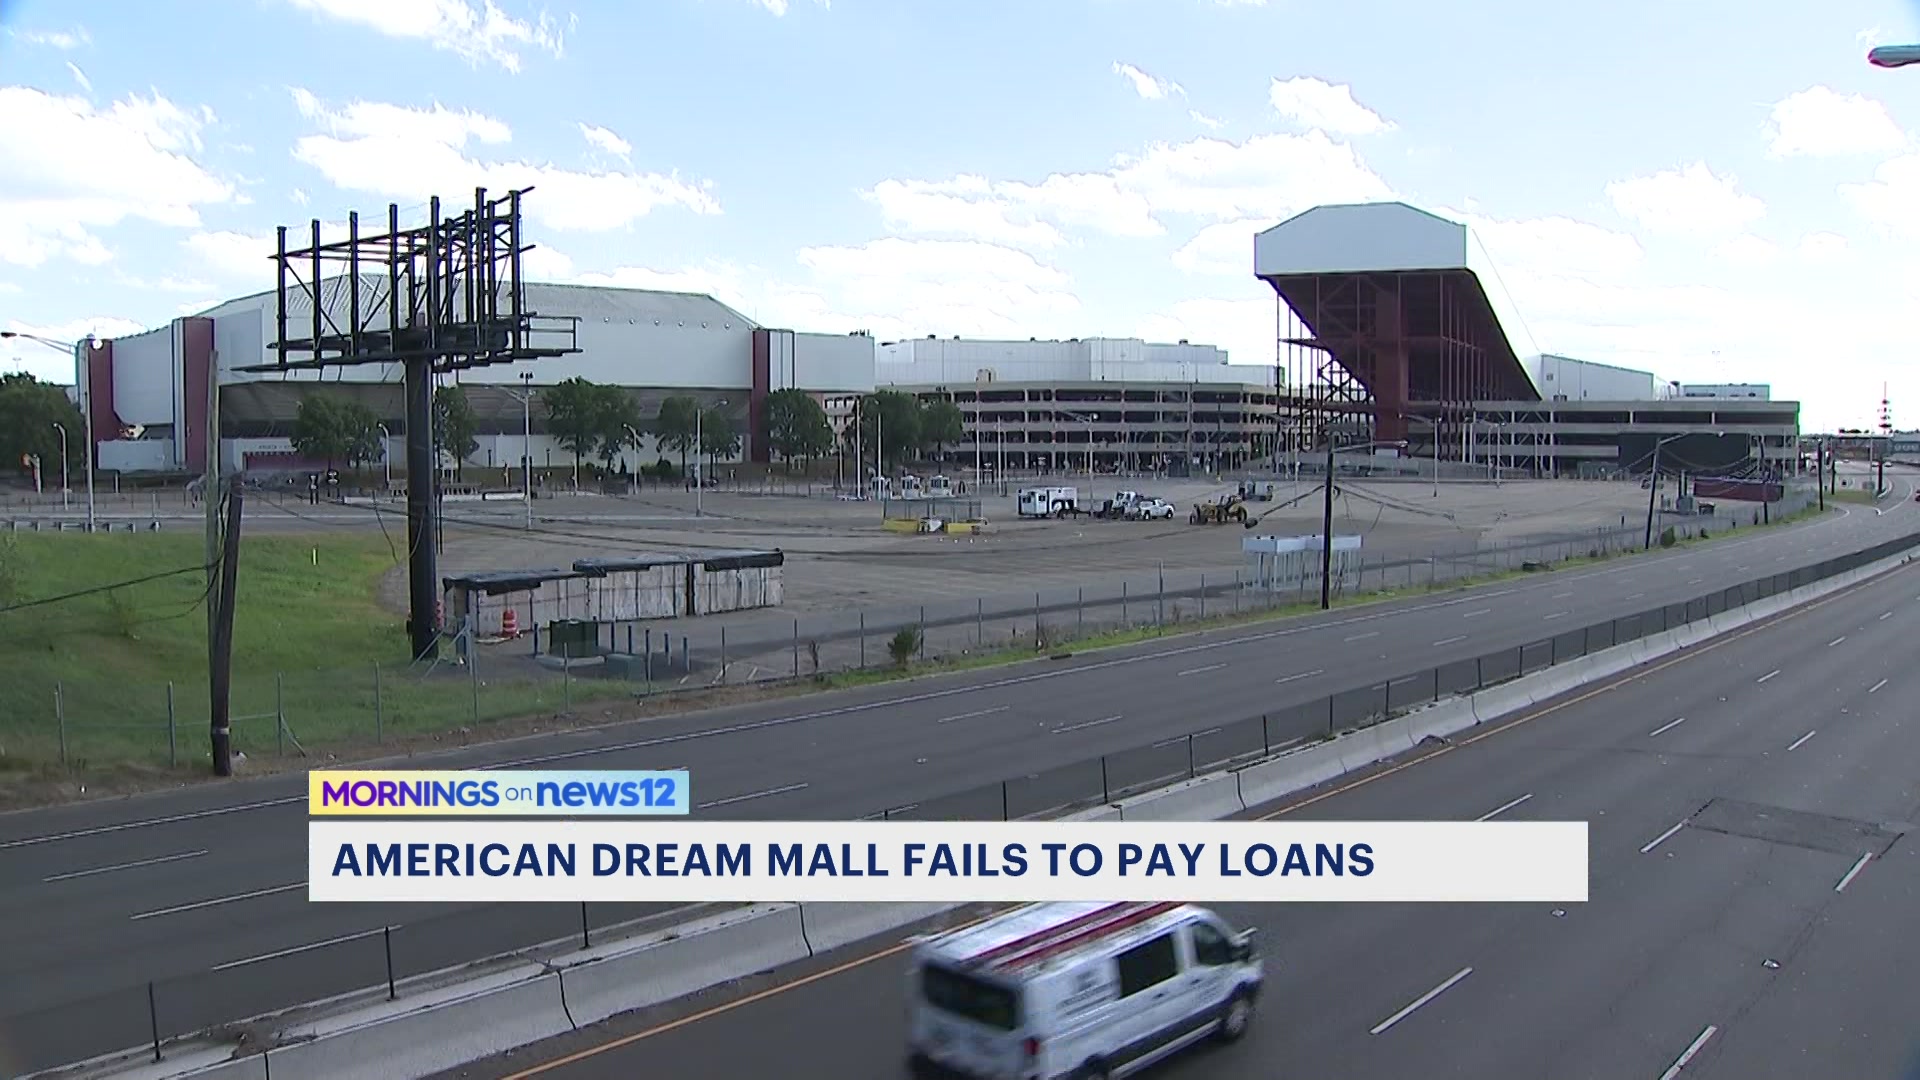 American Dream Mall Owes NJ Town $8 Million, Lawsuit Says - Bloomberg